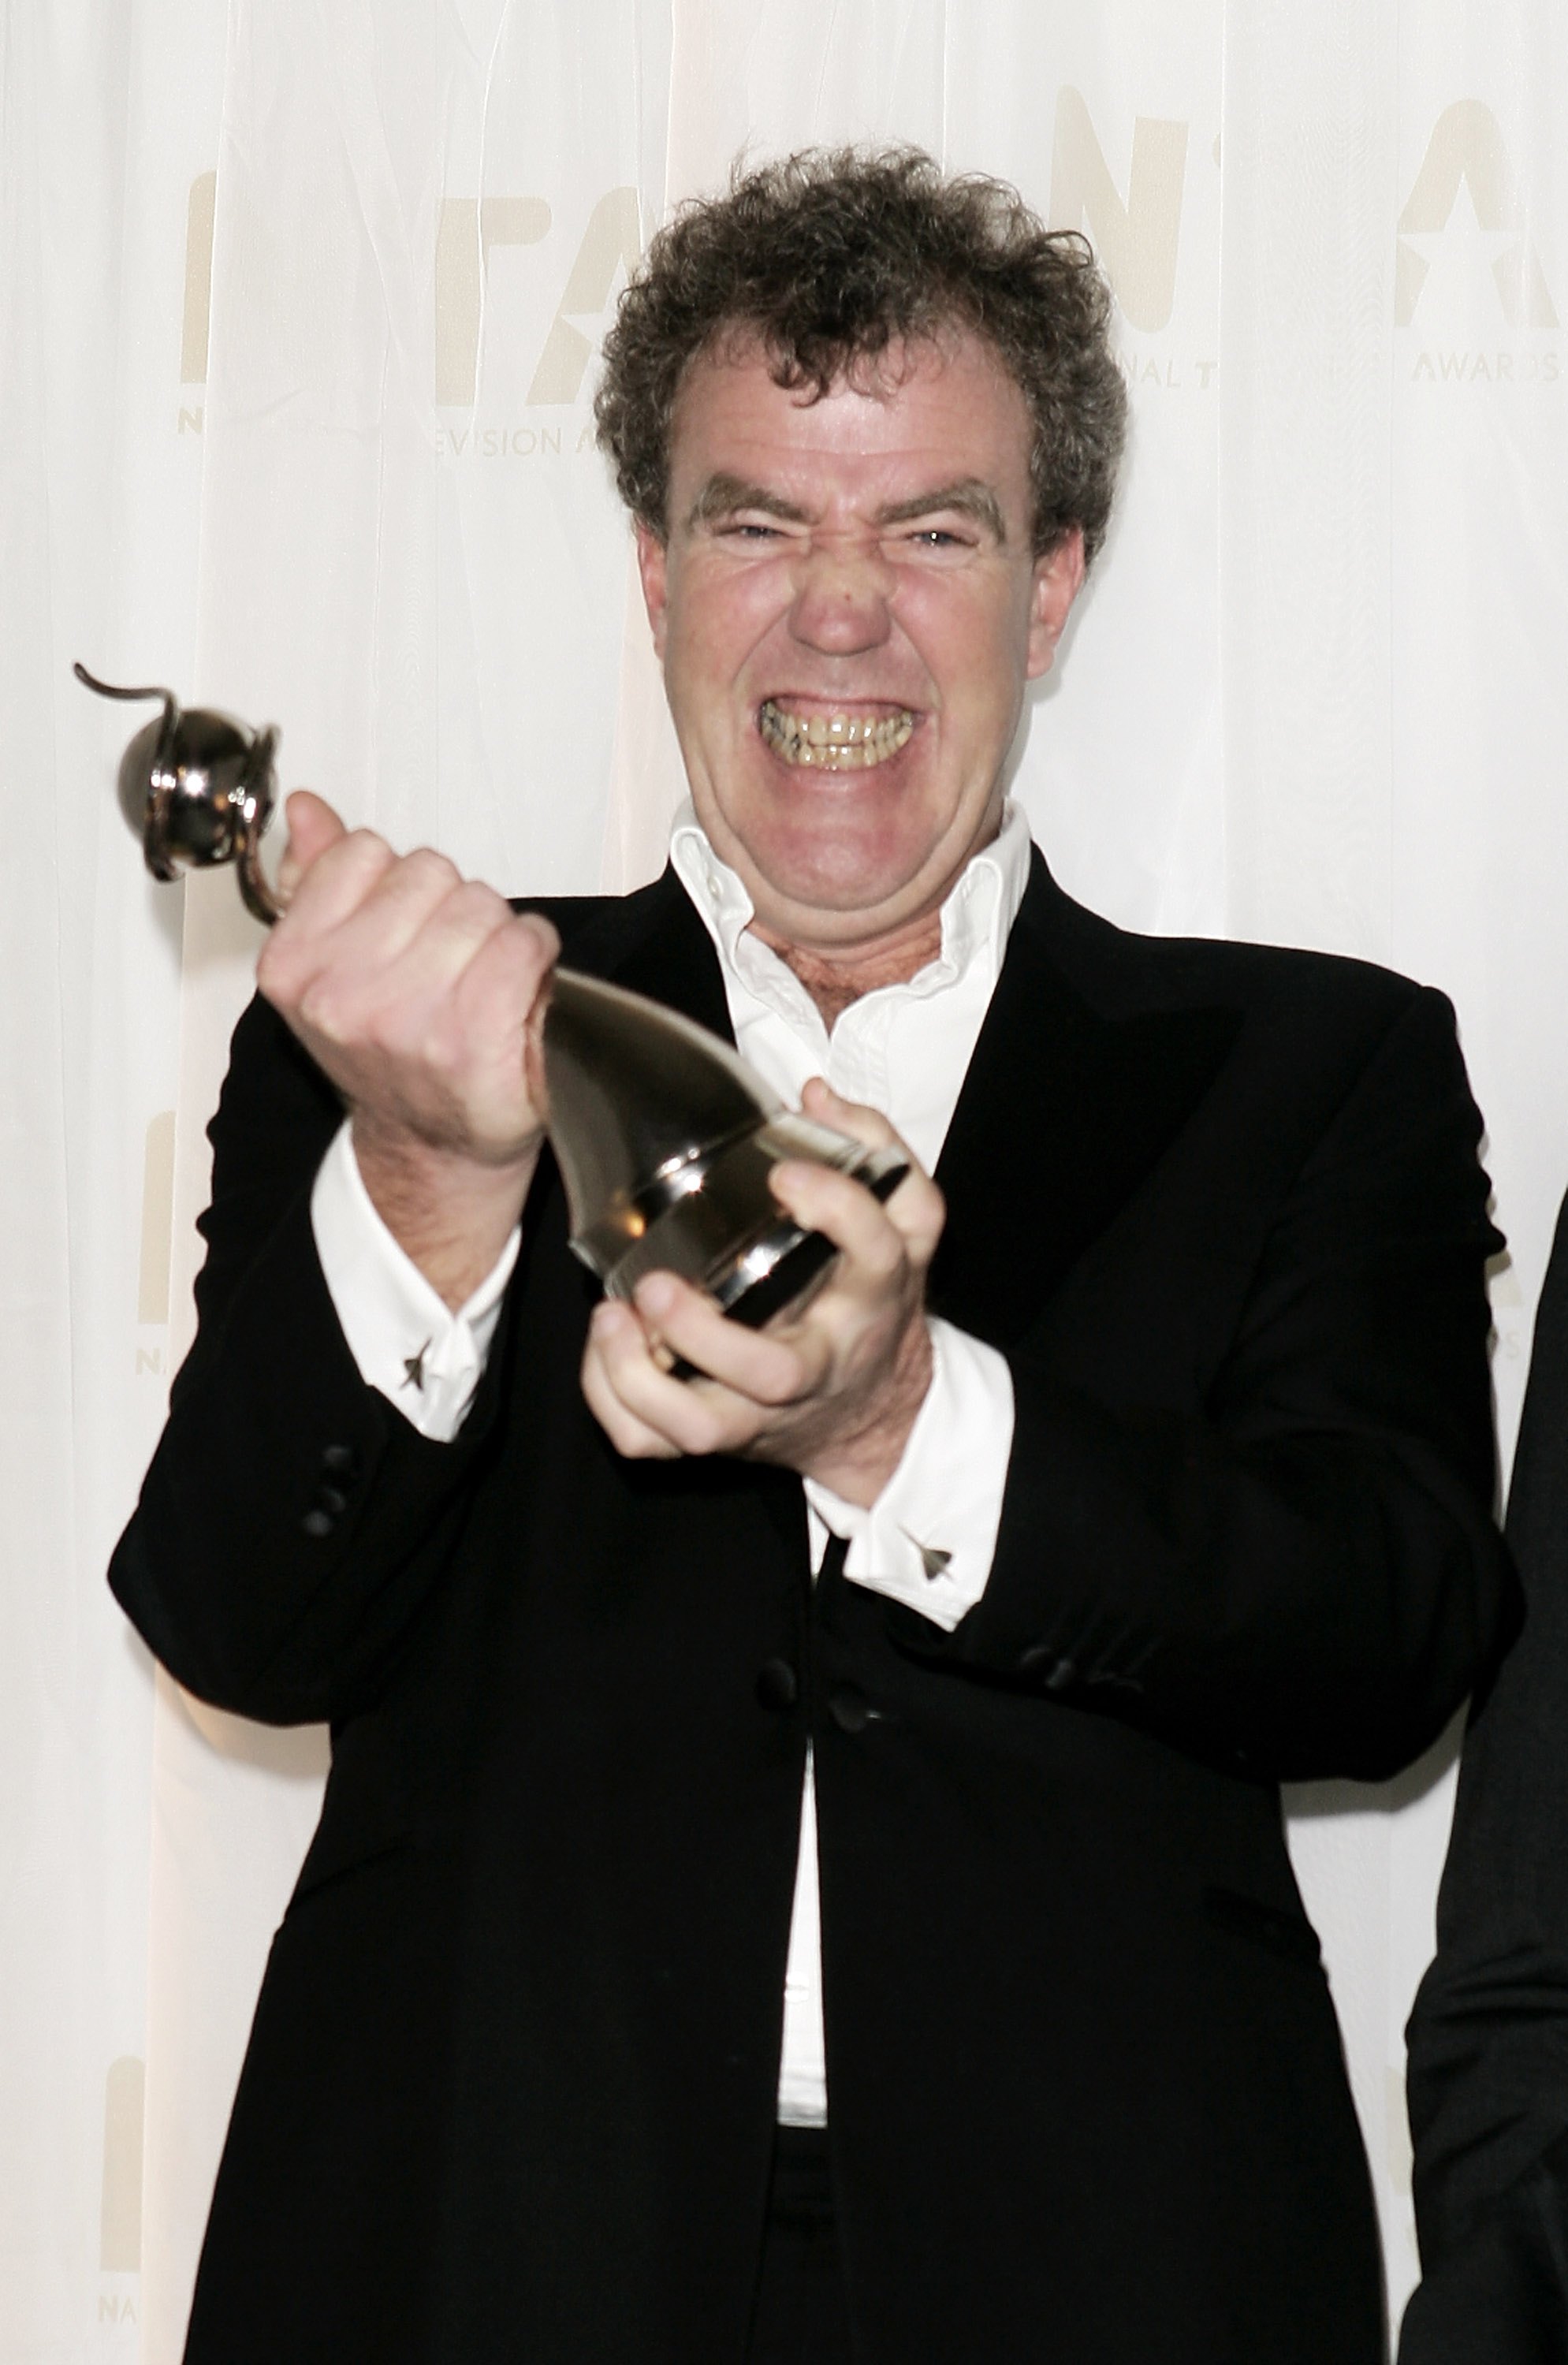 Jeremy Clarkson poses with the award for Most Popular Factual Programme for "Top Gear" on October 31, 2006 | Source: Getty Images